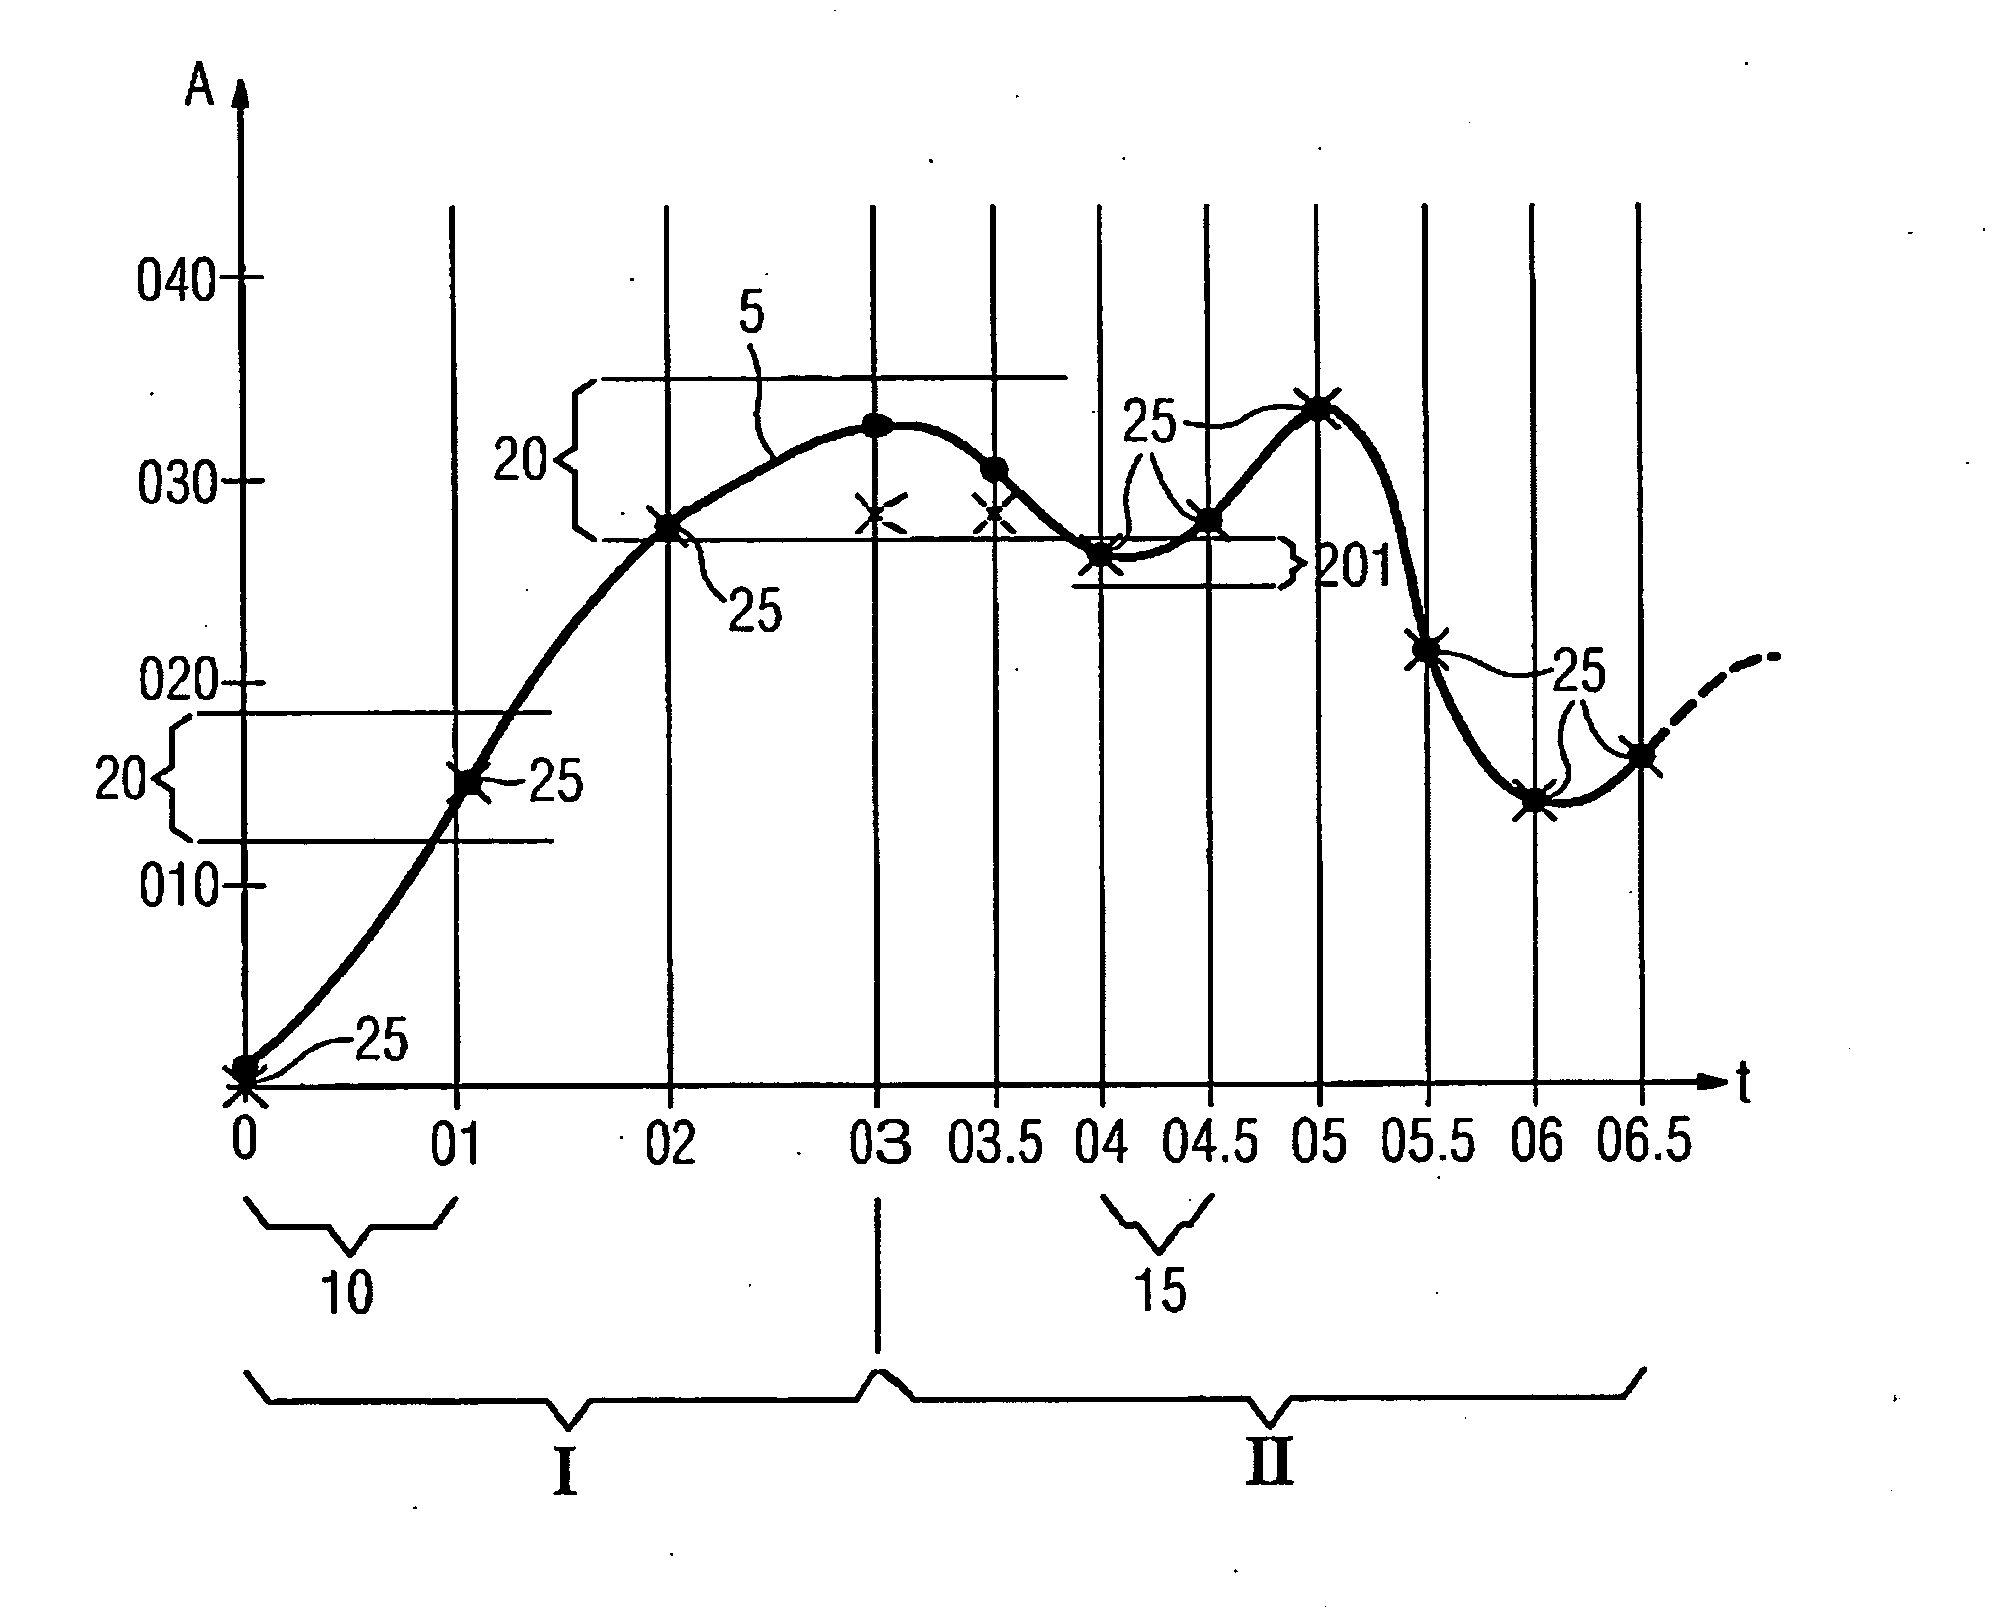 Method for storing plant process signals